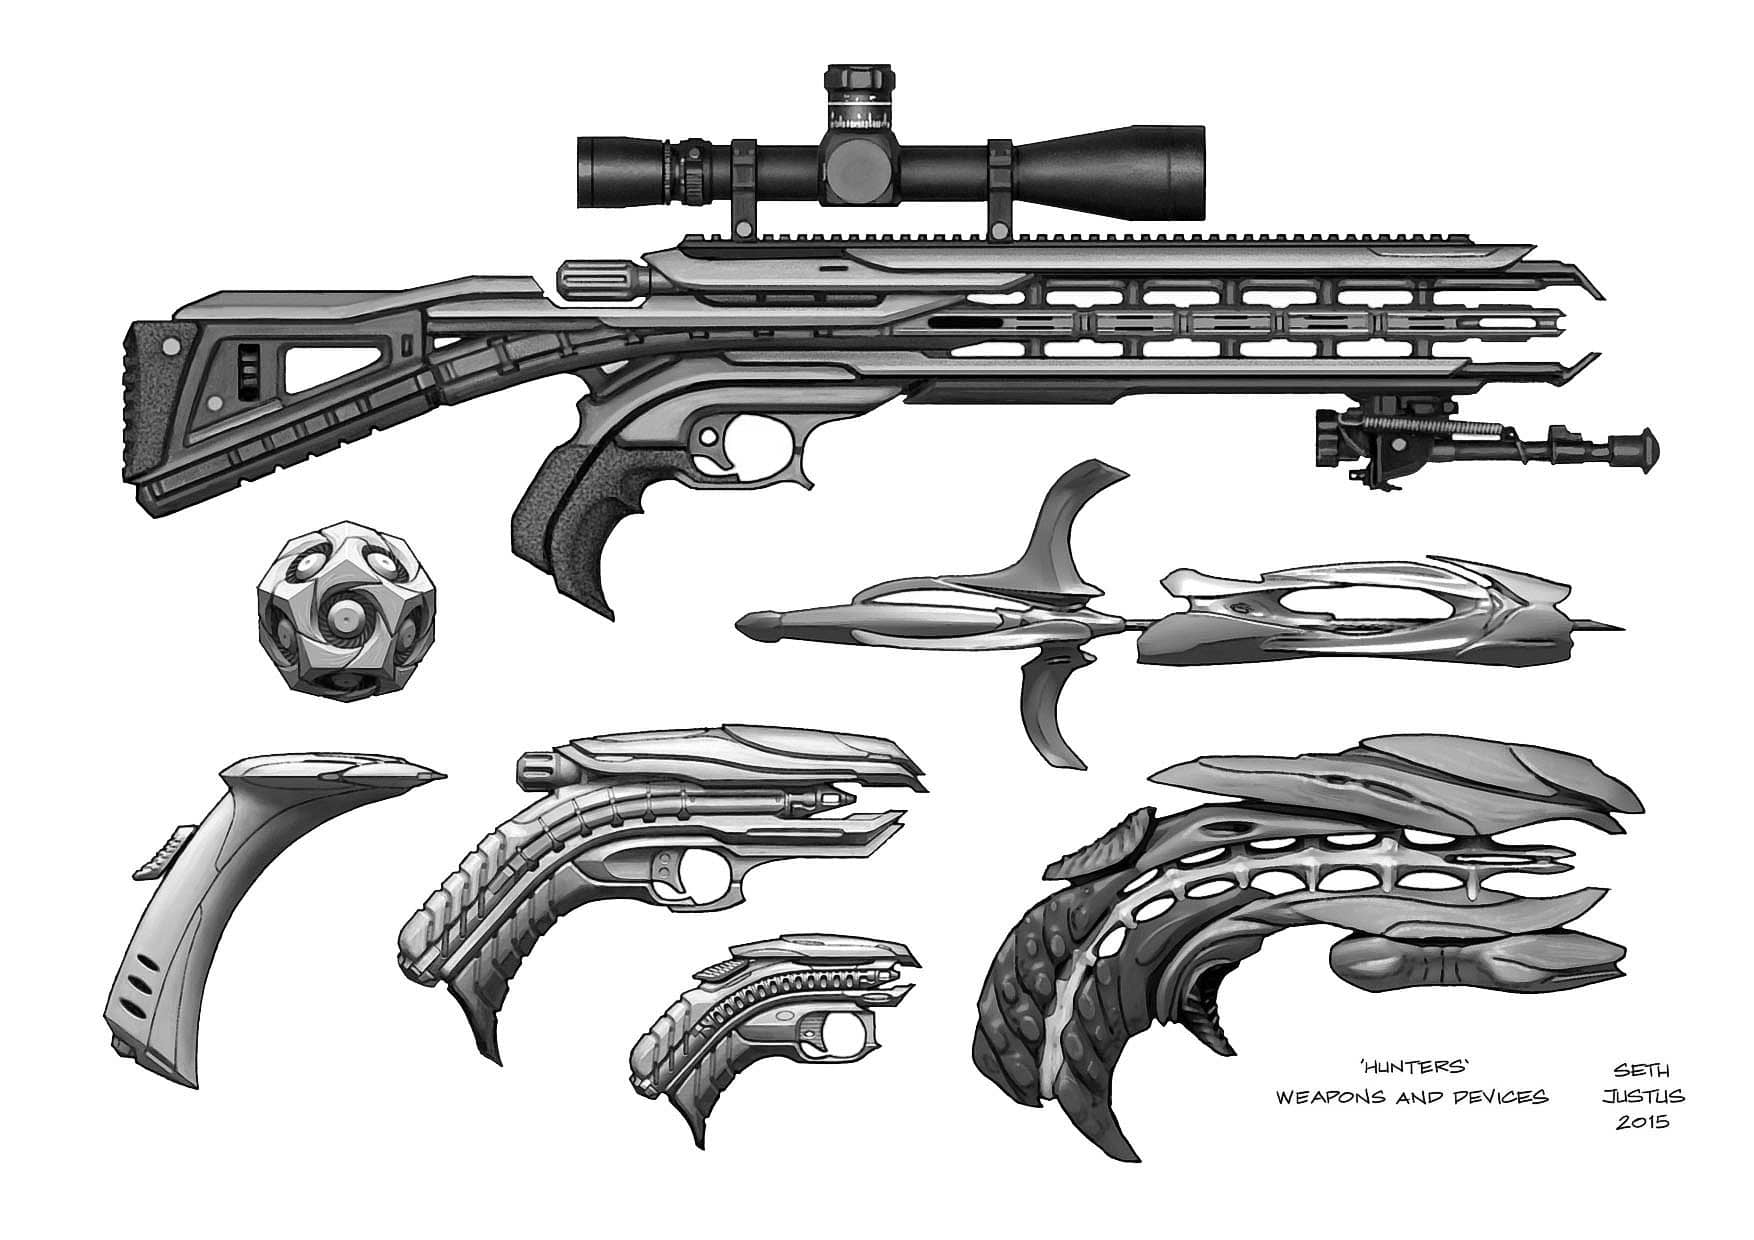 Gamma World Weapons in MCC & DCC by Seth Justus